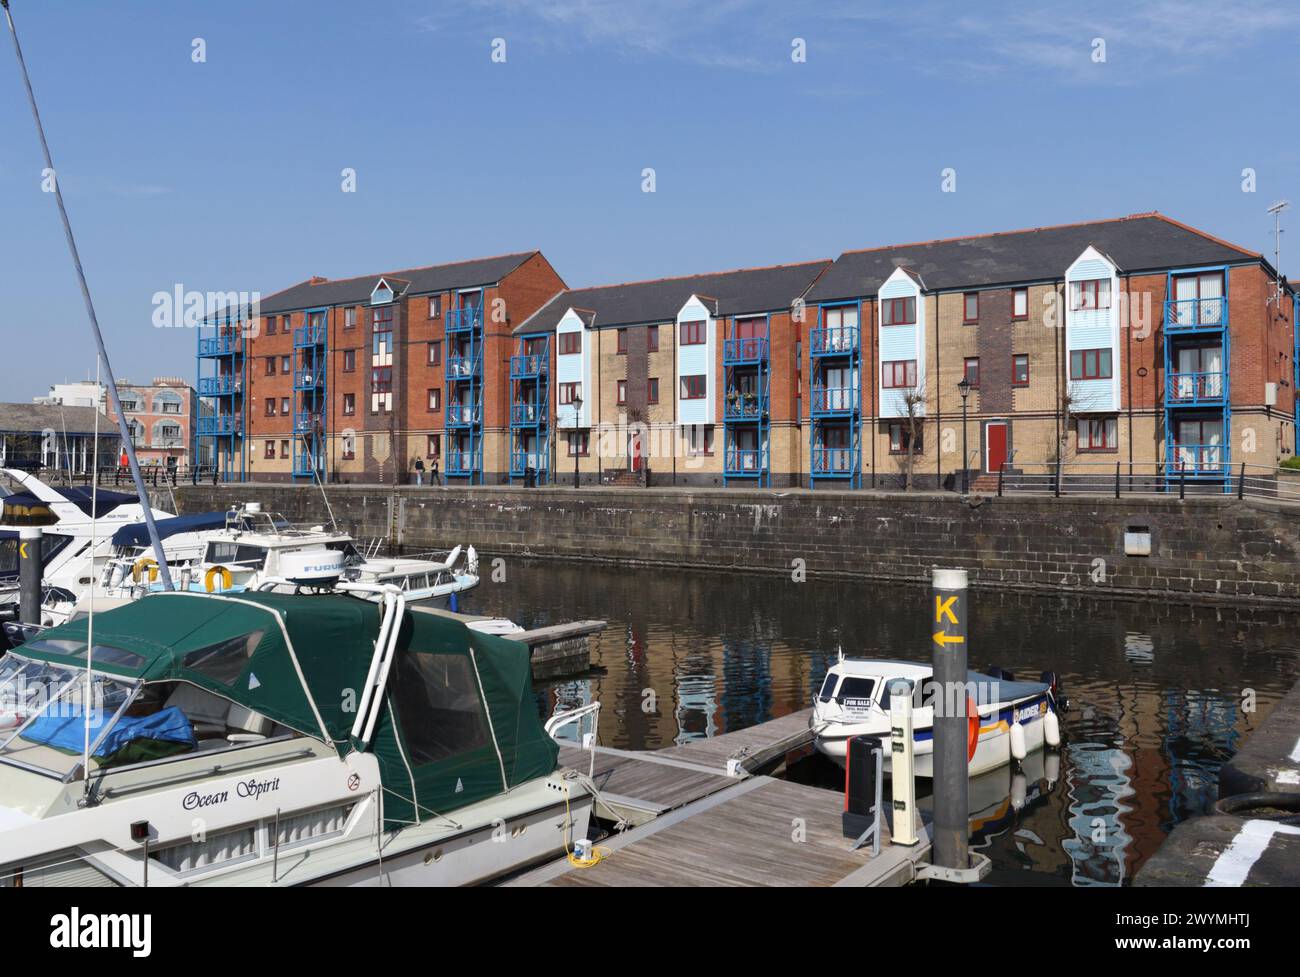 Swansea marina in the old town dock Wales UK, quayside waterfront housing houses, urban redevelopment Stock Photo